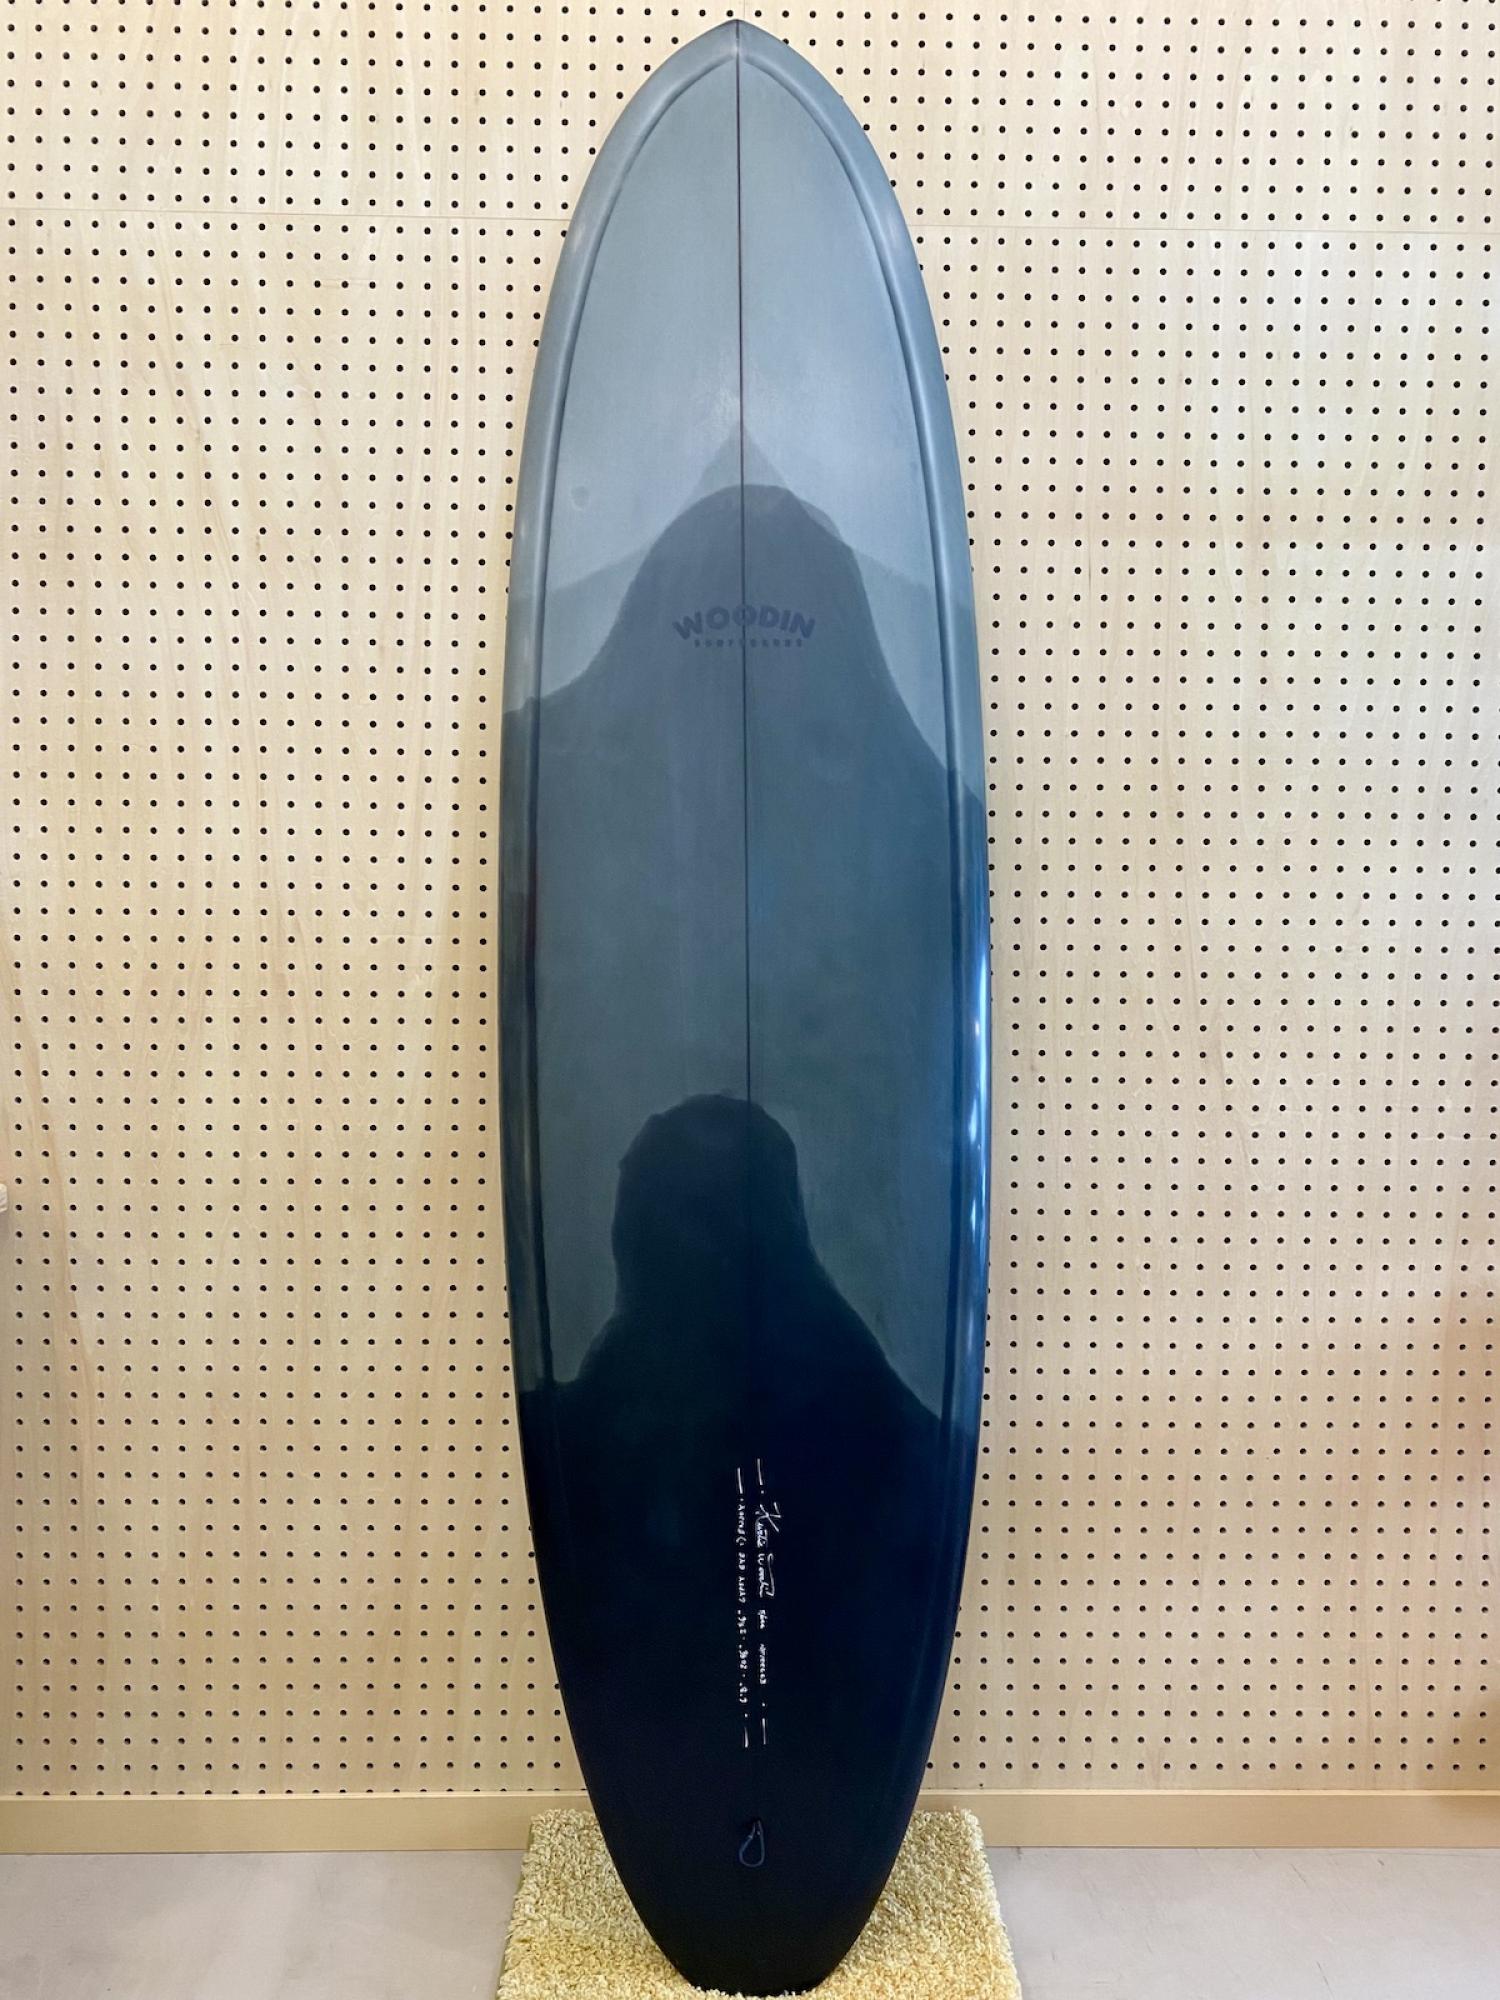 Woodin Surfboards|Okinawa surf shop YES SURF